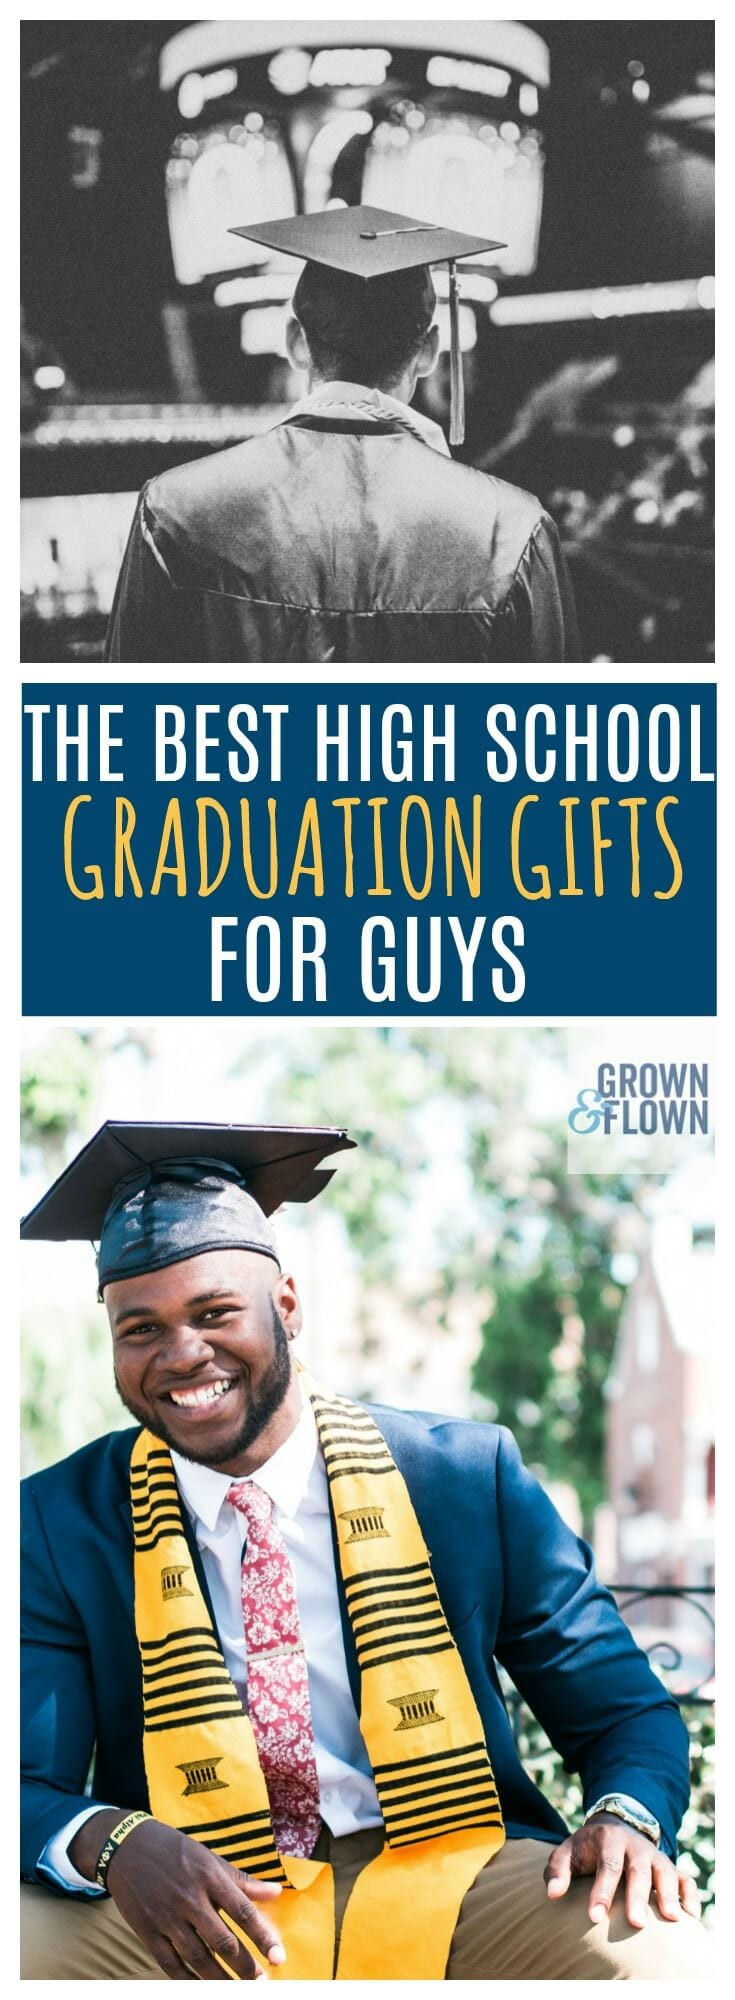 Best Graduation Gift Ideas
 2020 High School Graduation Gifts for Guys They Will Love